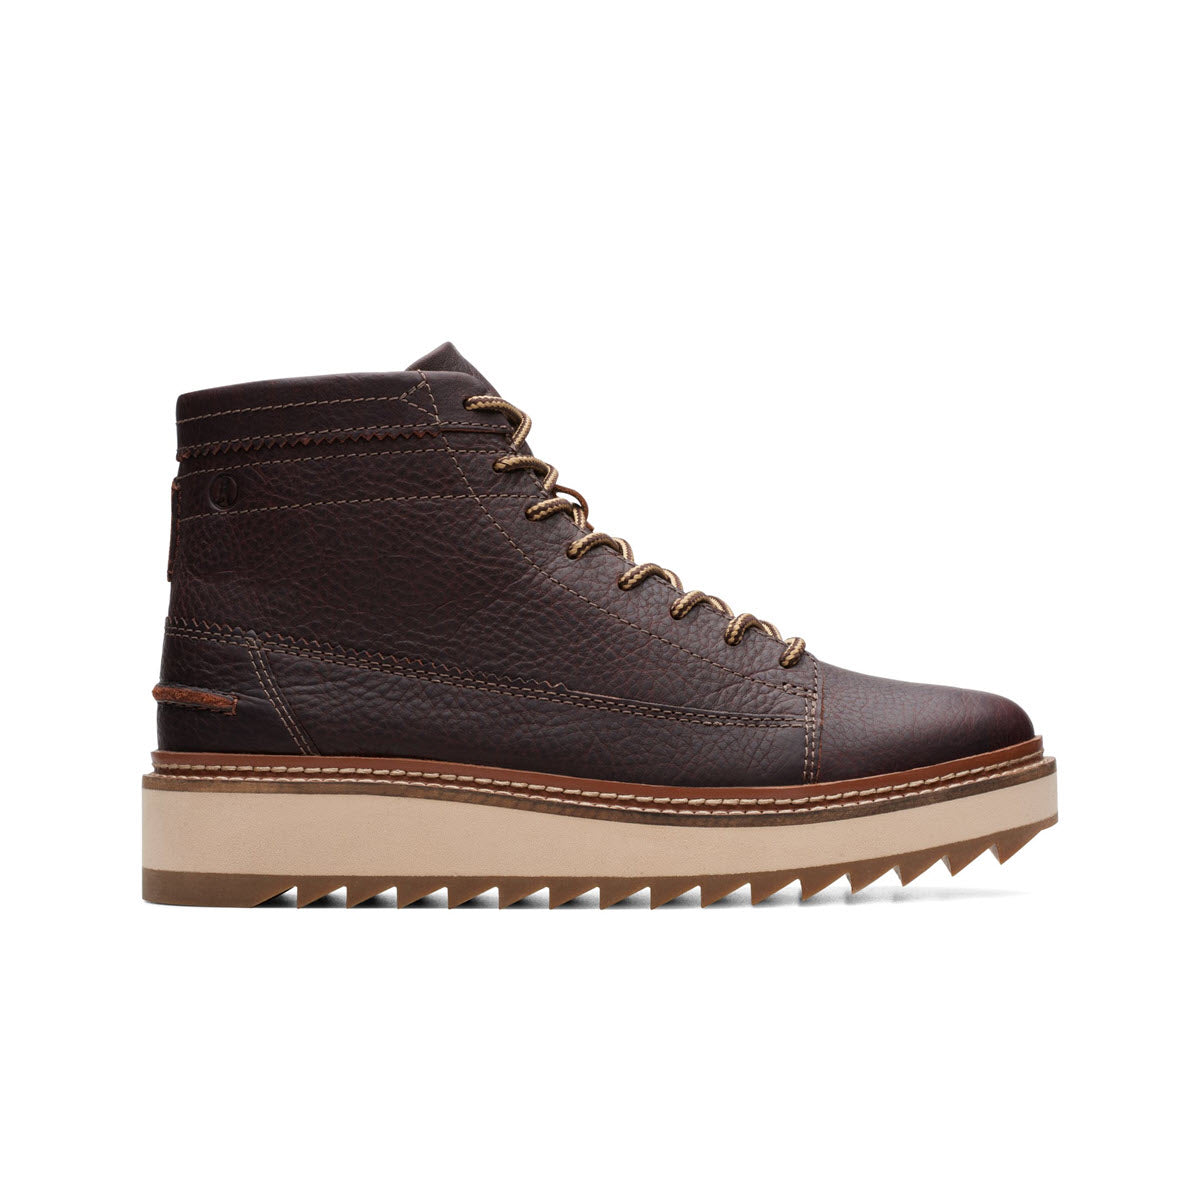 A Clarks Clarkhill Hi Boot in dark brown leather with lace-up front and a thick, ridged rubber outsole, shown in profile against a white background.